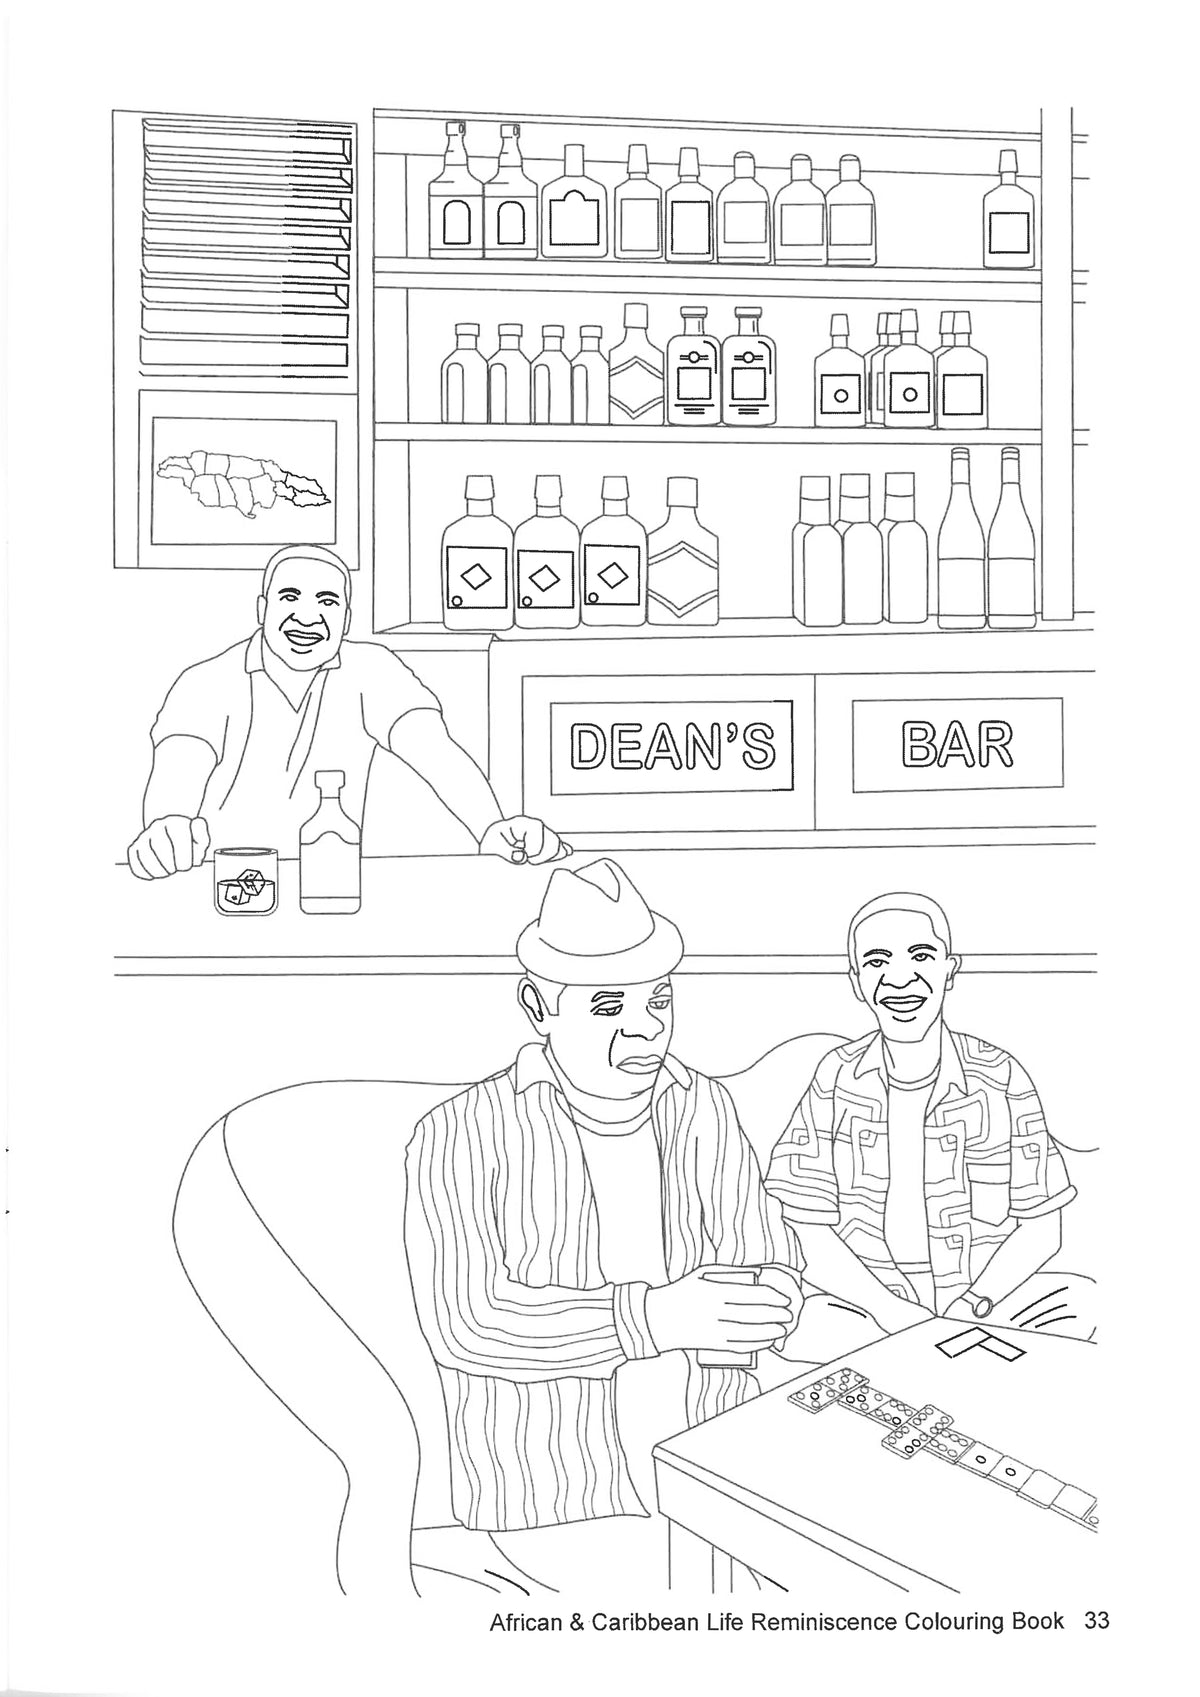 Men playing dominoes at a bar, colouring in book